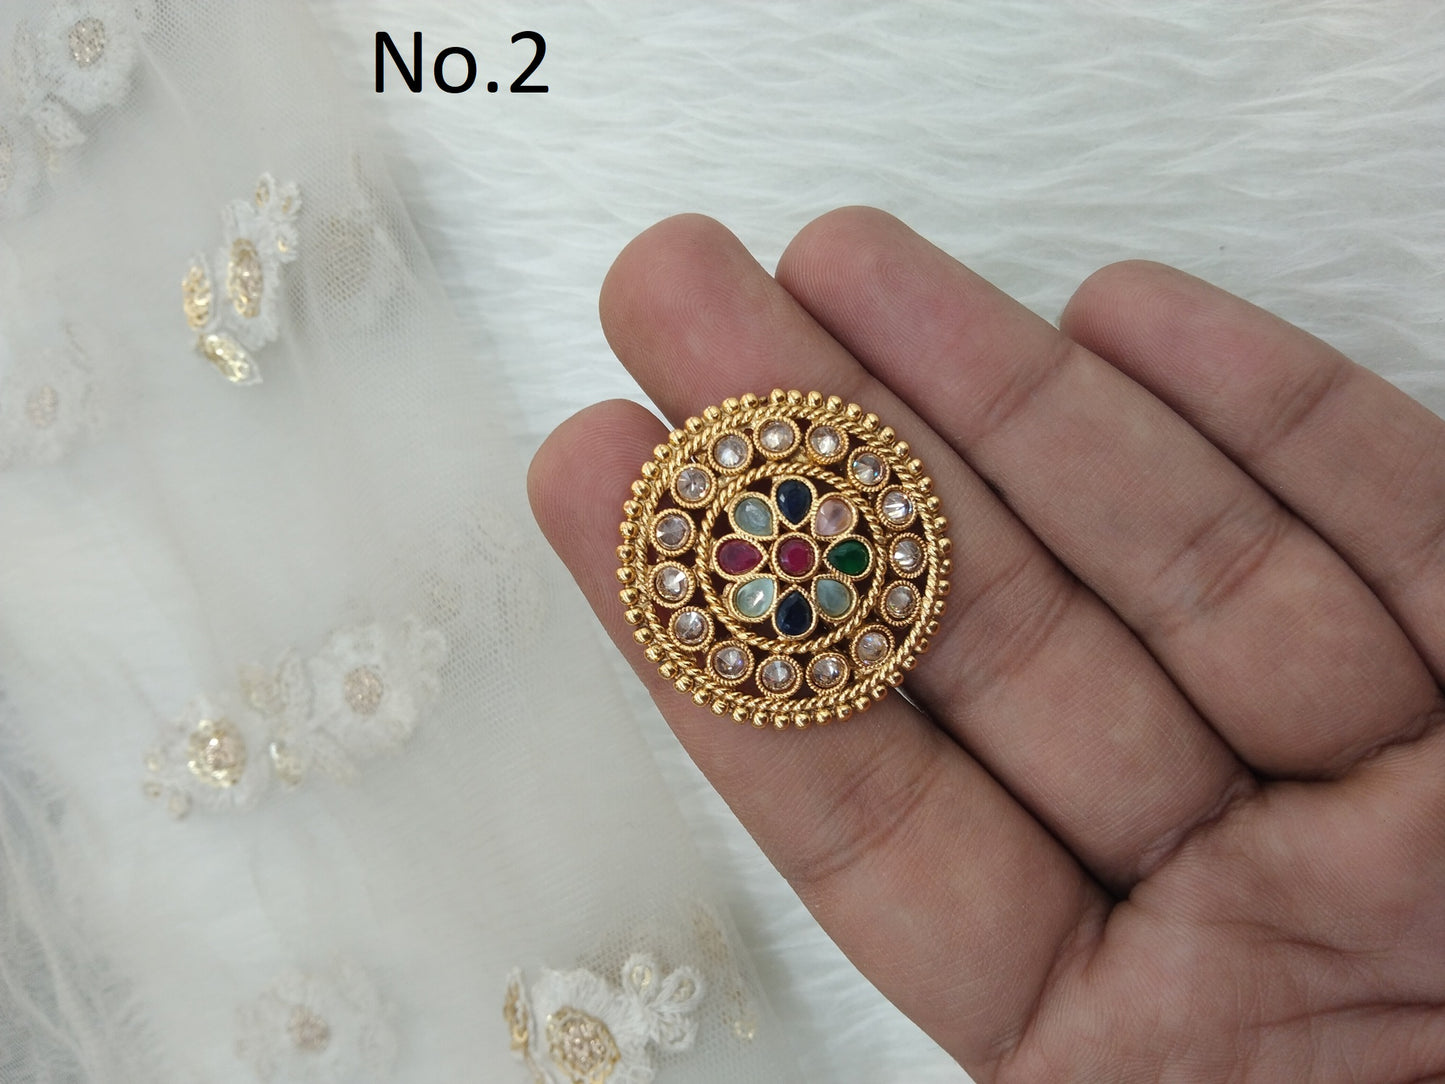 Indian Ring /gold finish Finger rings round bridal cocktail ring delvi hand accessory